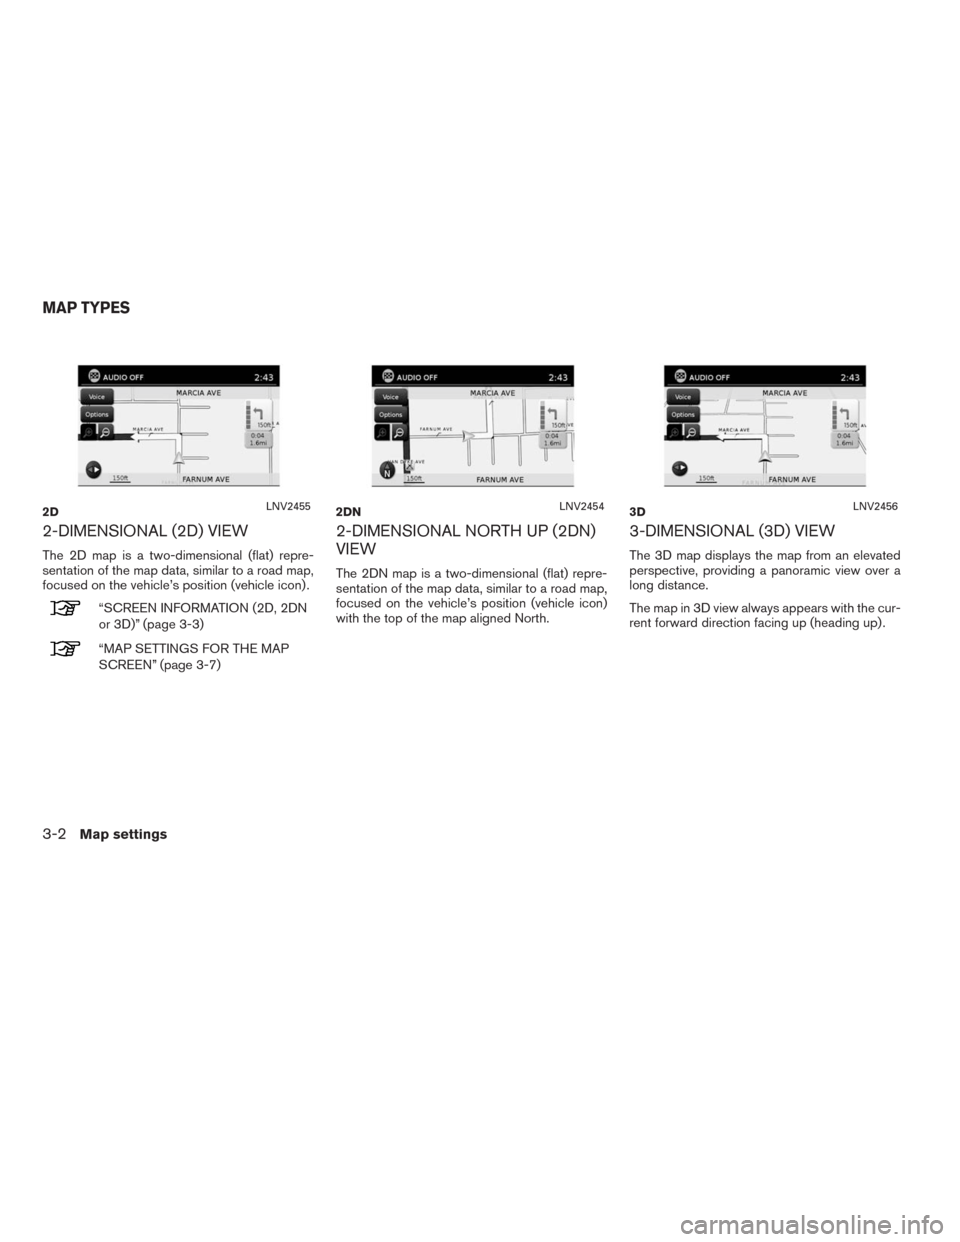 NISSAN ROGUE 2015 2.G LC2 Kai Navigation Manual 2-DIMENSIONAL (2D) VIEW
The 2D map is a two-dimensional (flat) repre-
sentation of the map data, similar to a road map,
focused on the vehicle’s position (vehicle icon) .
“SCREEN INFORMATION (2D, 